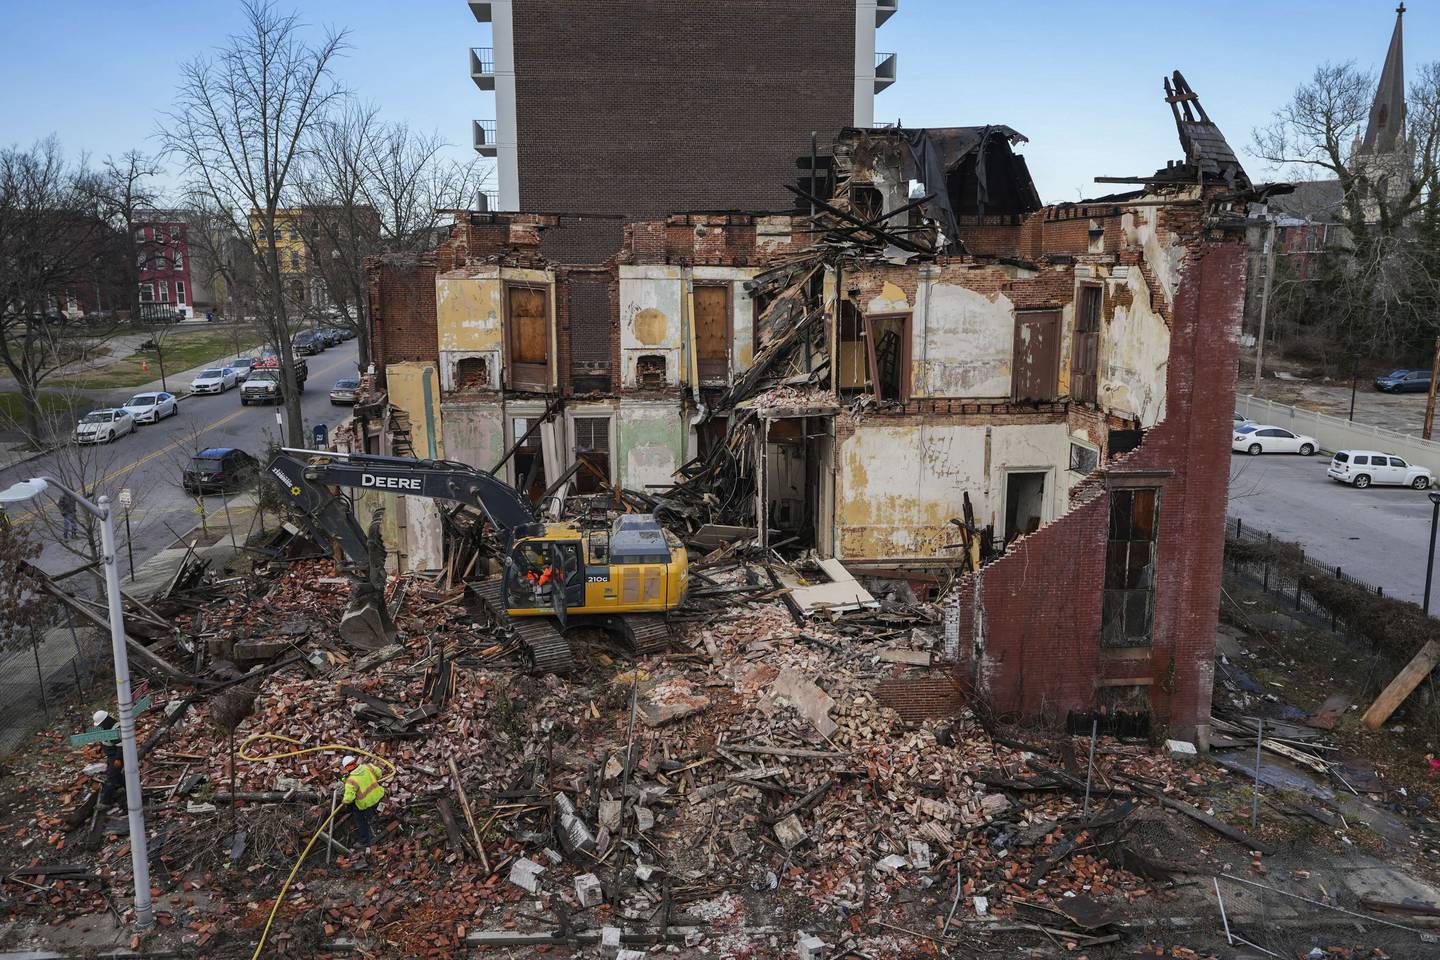 Seller's Mansion, which caught fire early on February 24, 2023, is torn down that same afternoon.